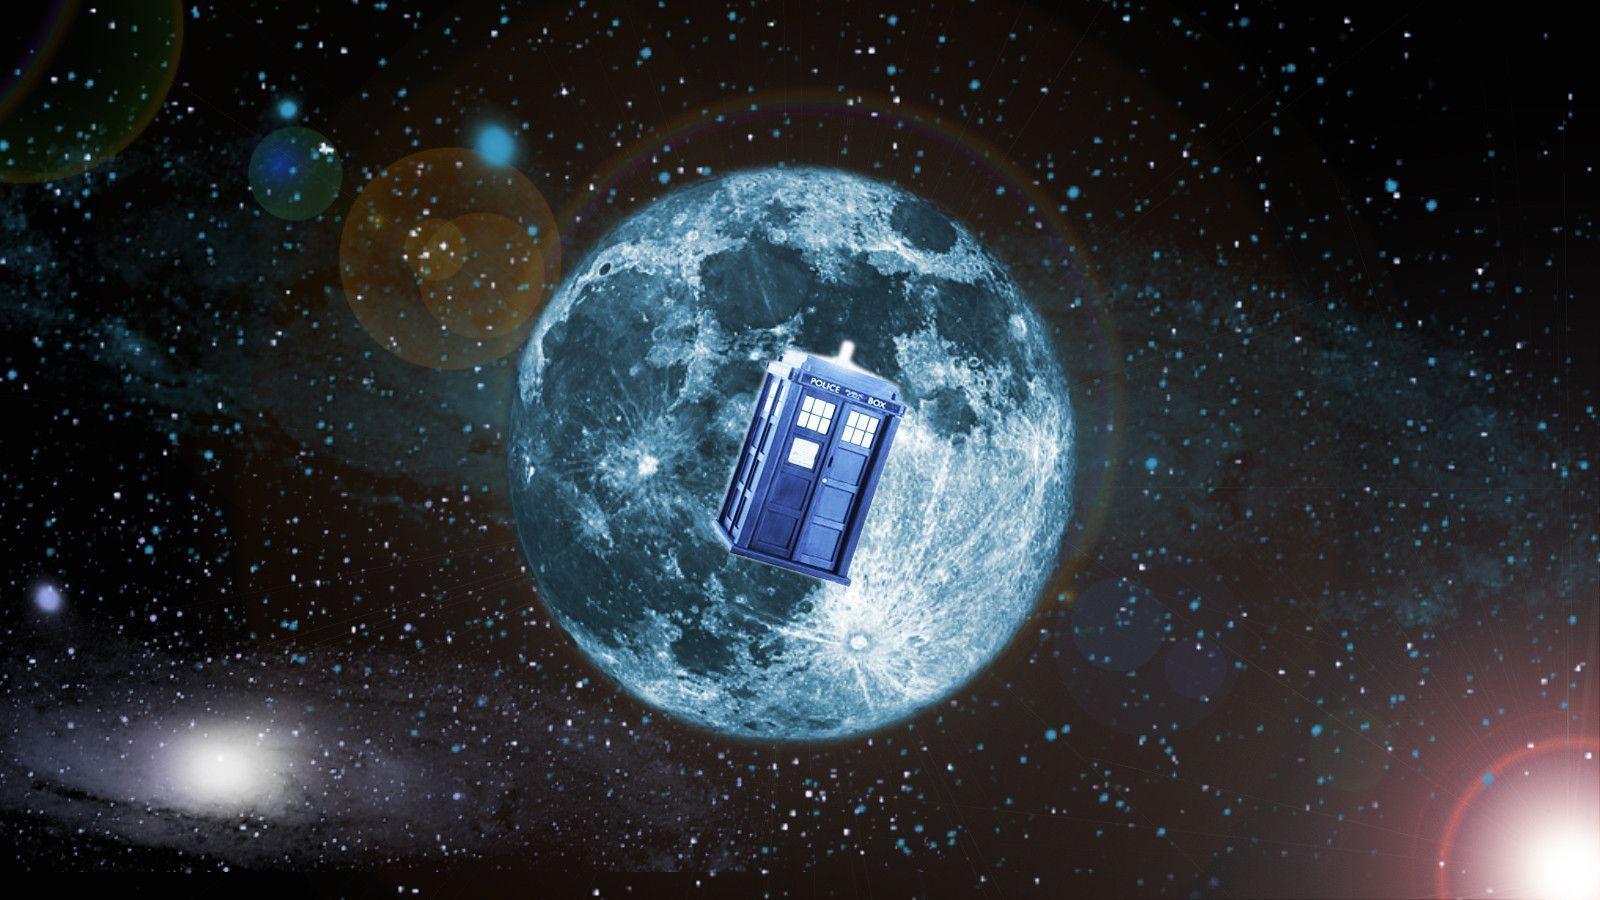 Download Doctor Who Ross Wallpaper 1600x900. HD